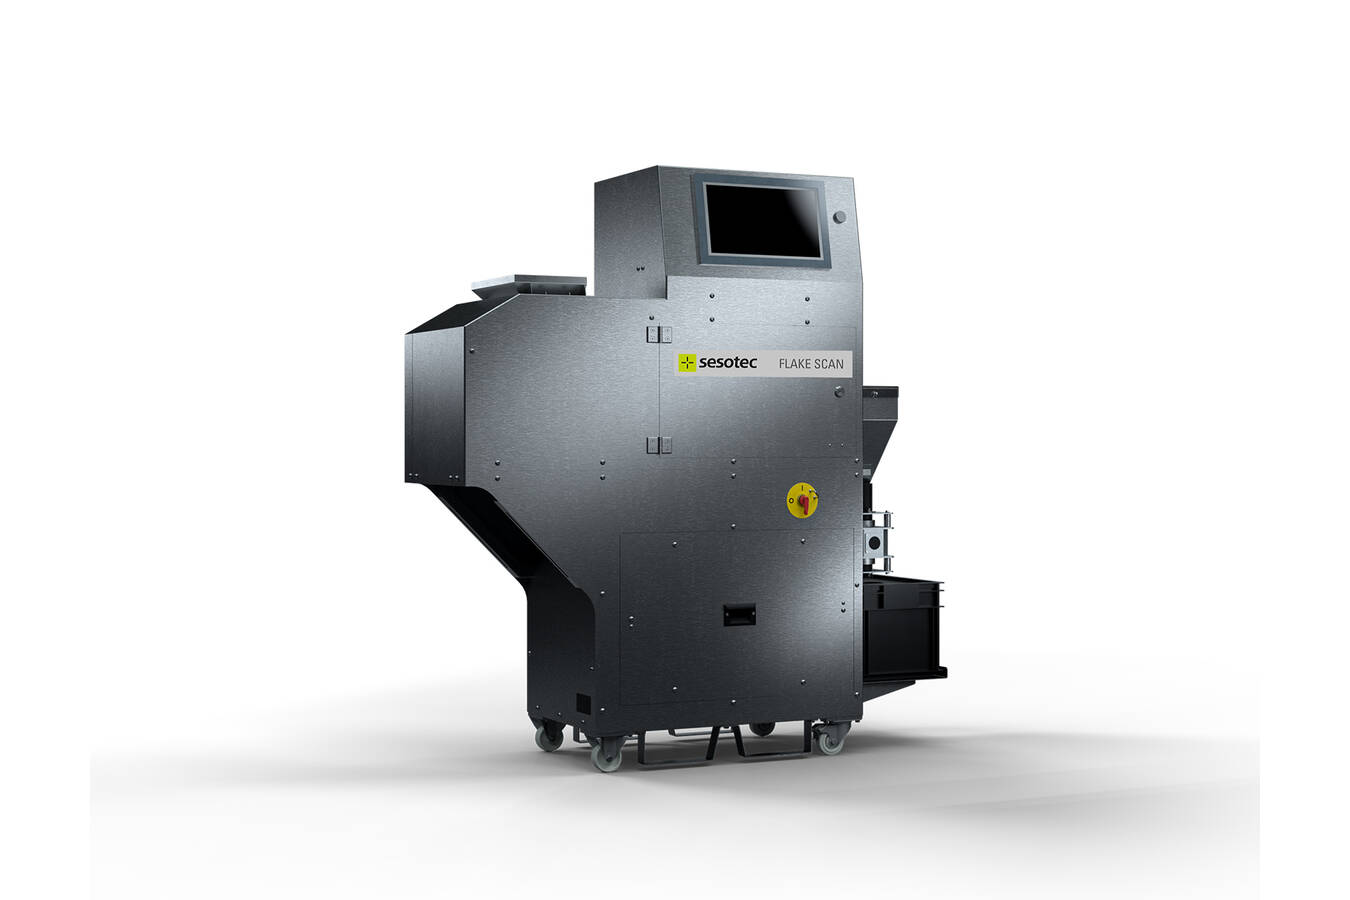 FLAKE SCAN analysis system from Sesotec 